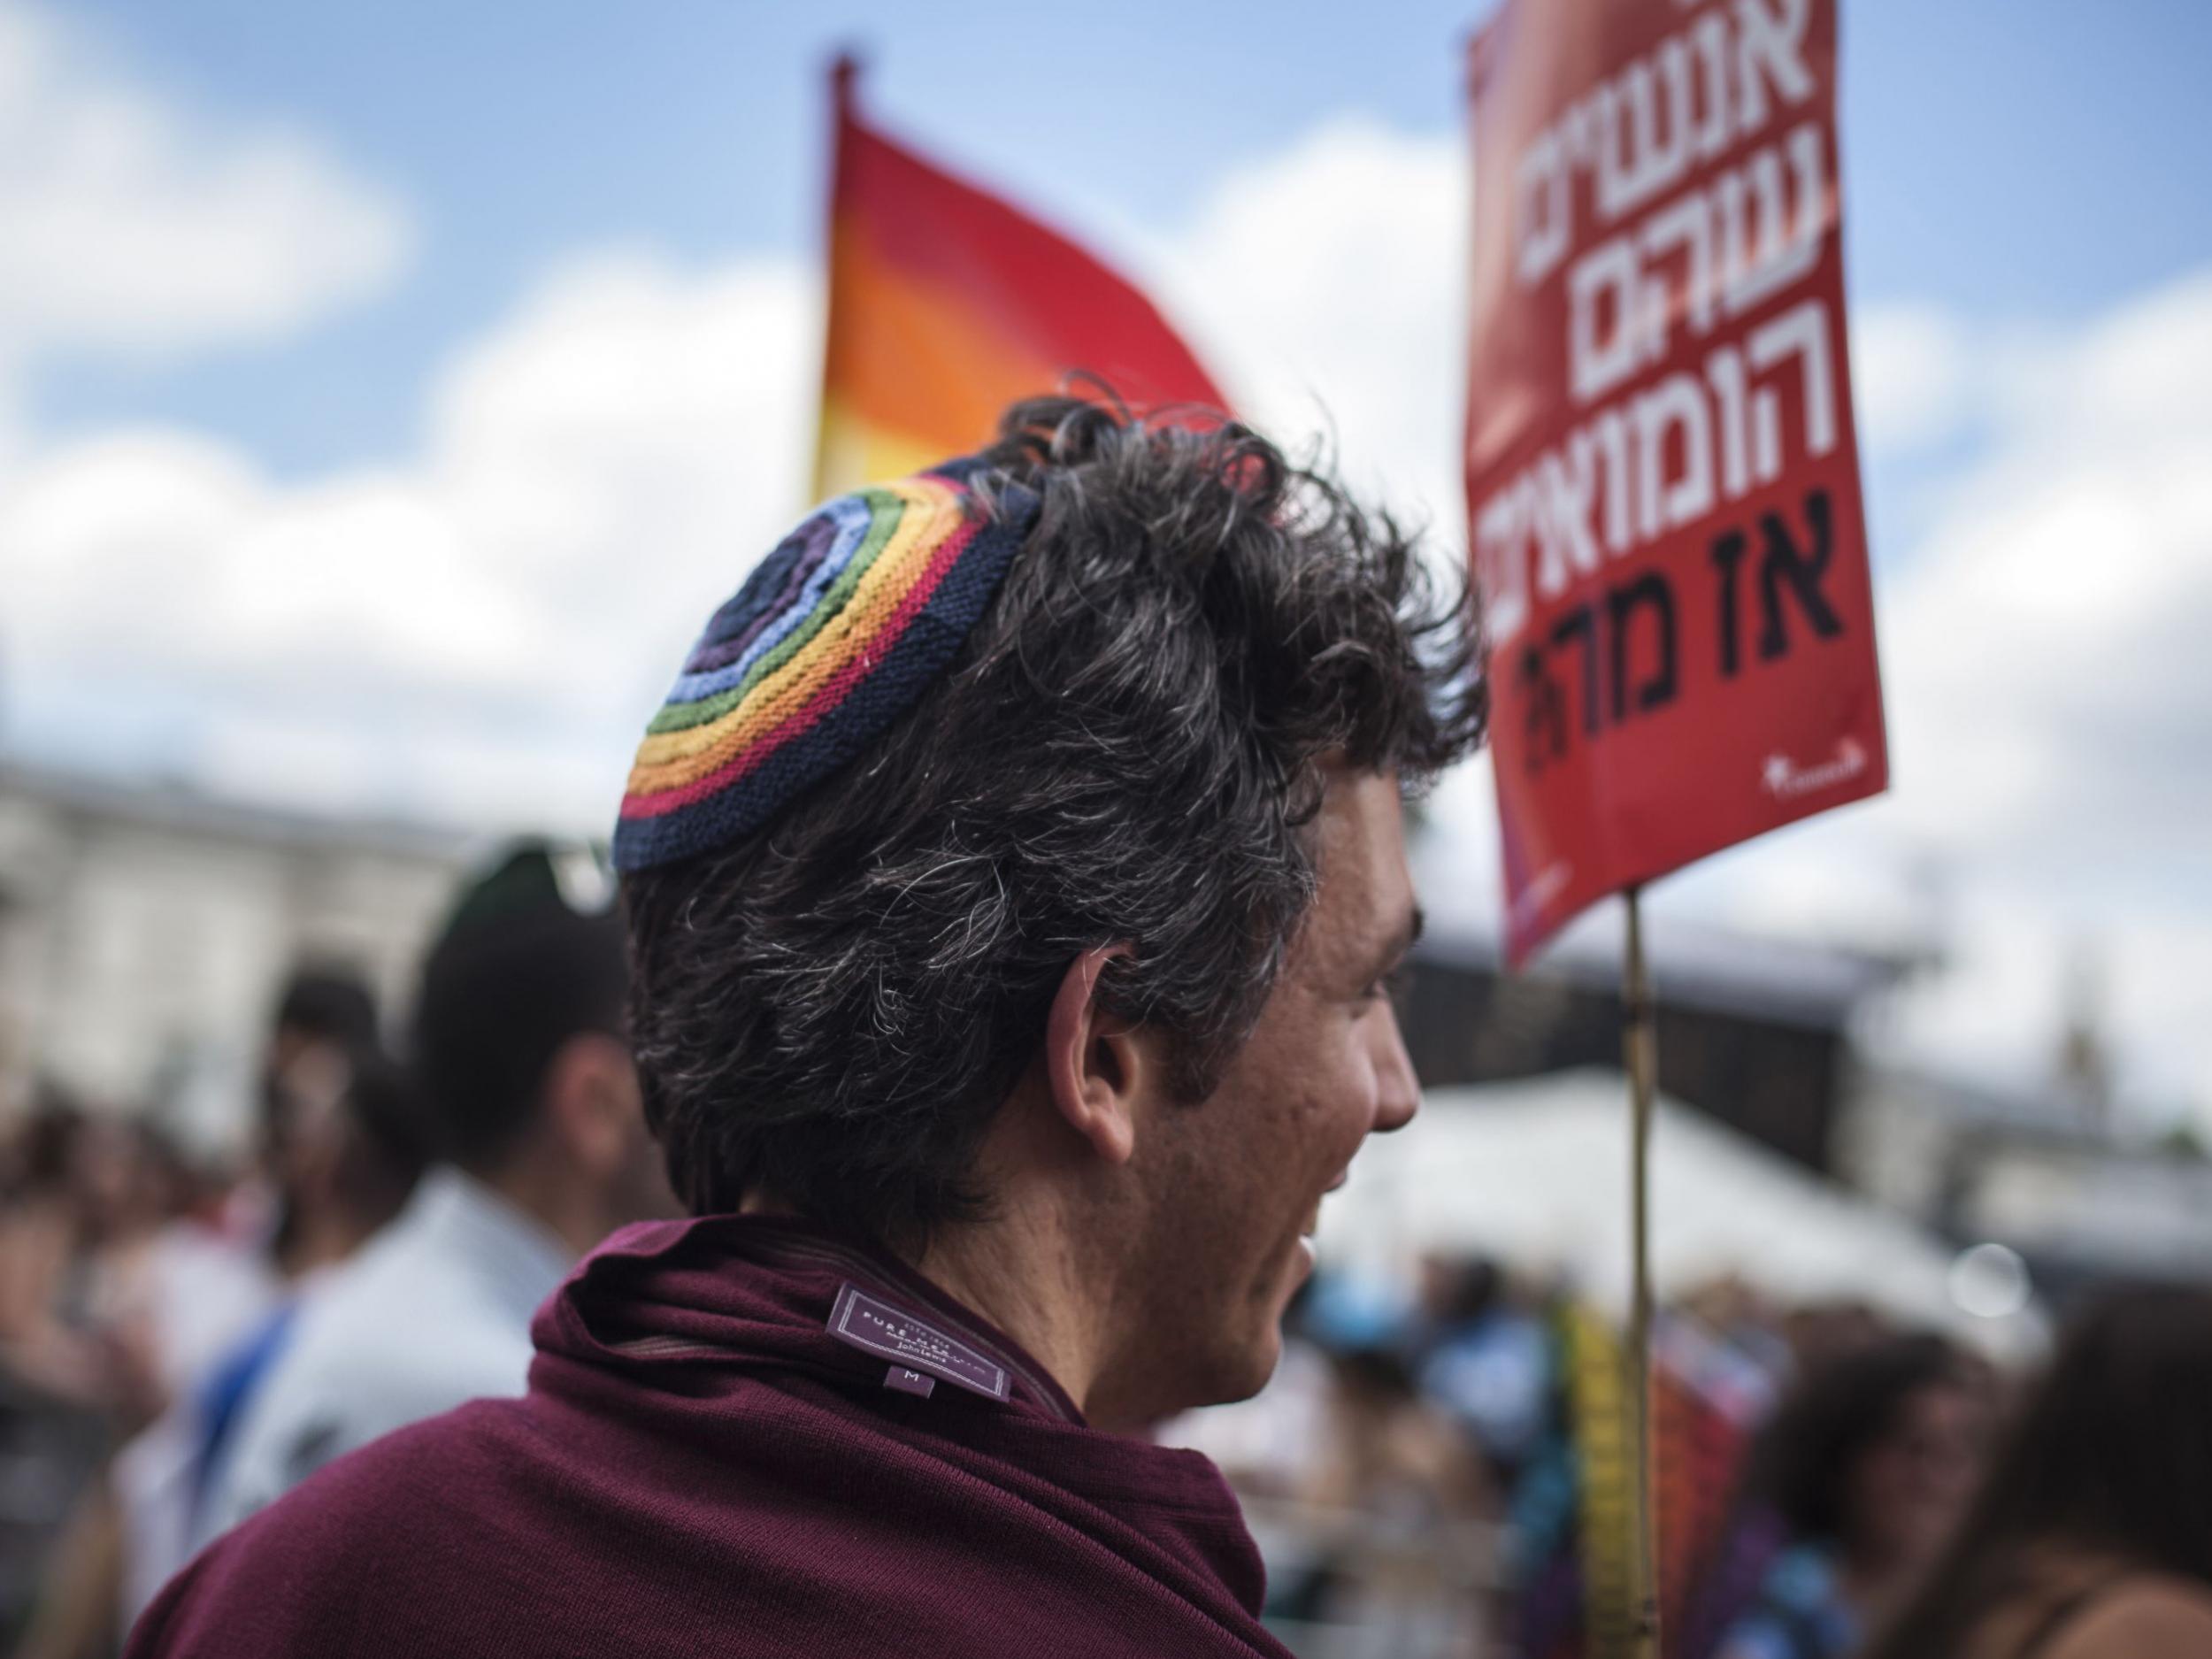 A man wearing a kippah takes part in the annual Pride parade in London